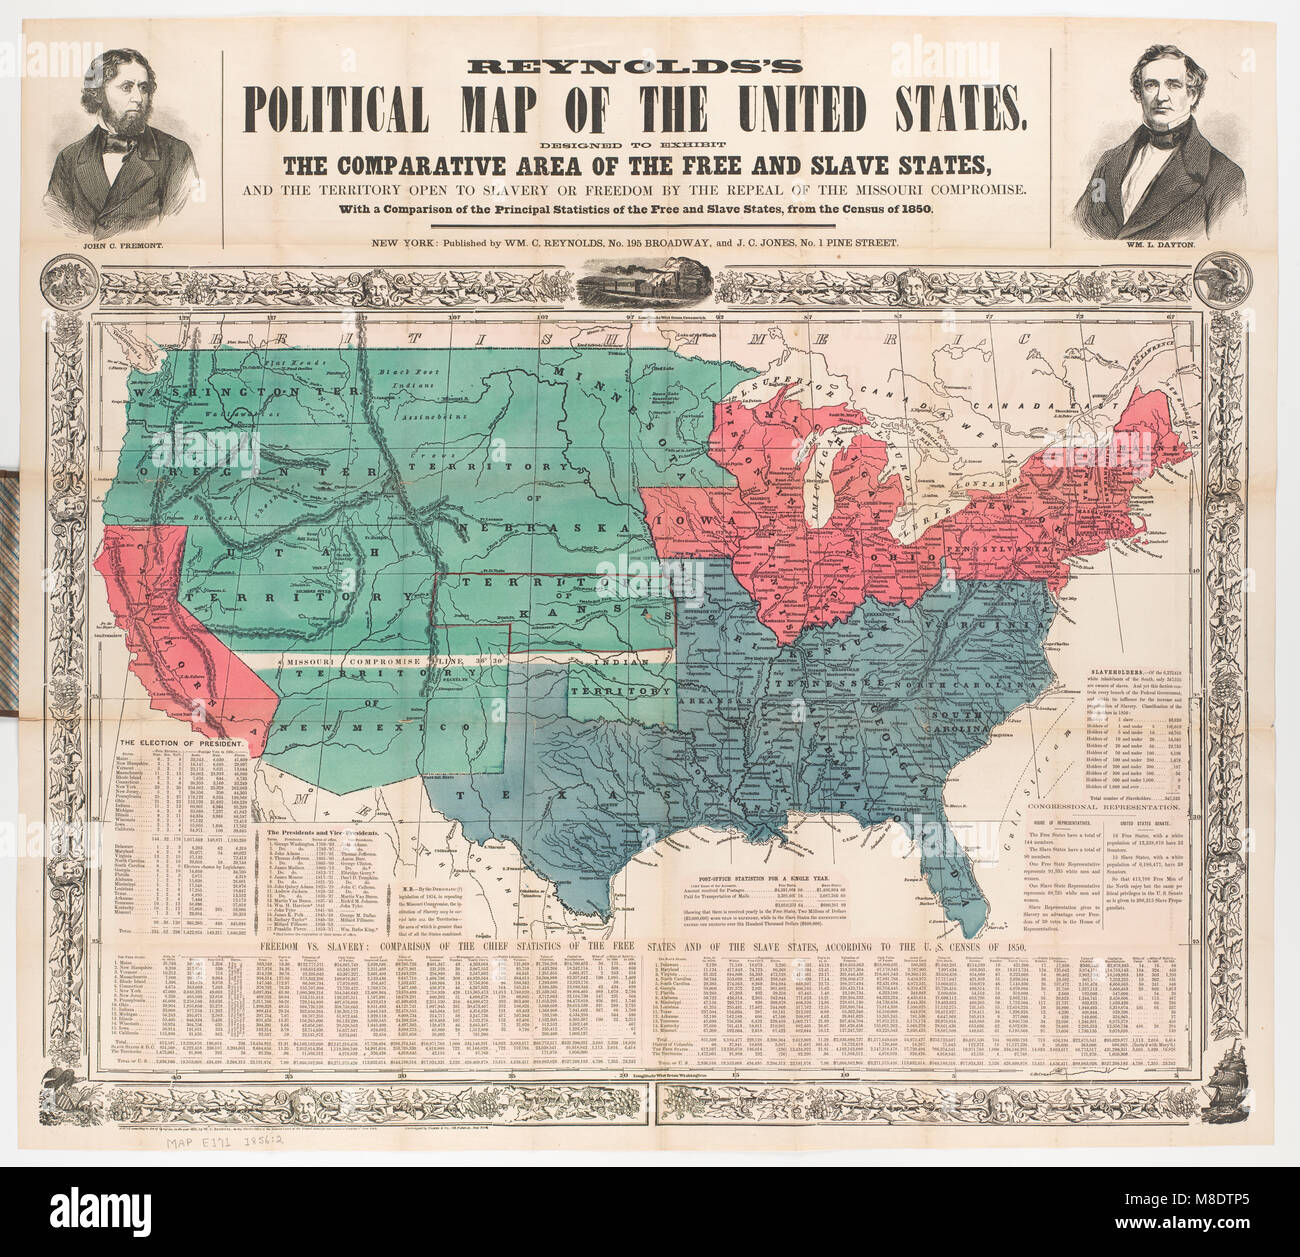 Political Map of the United States, 1856 Stock Photo